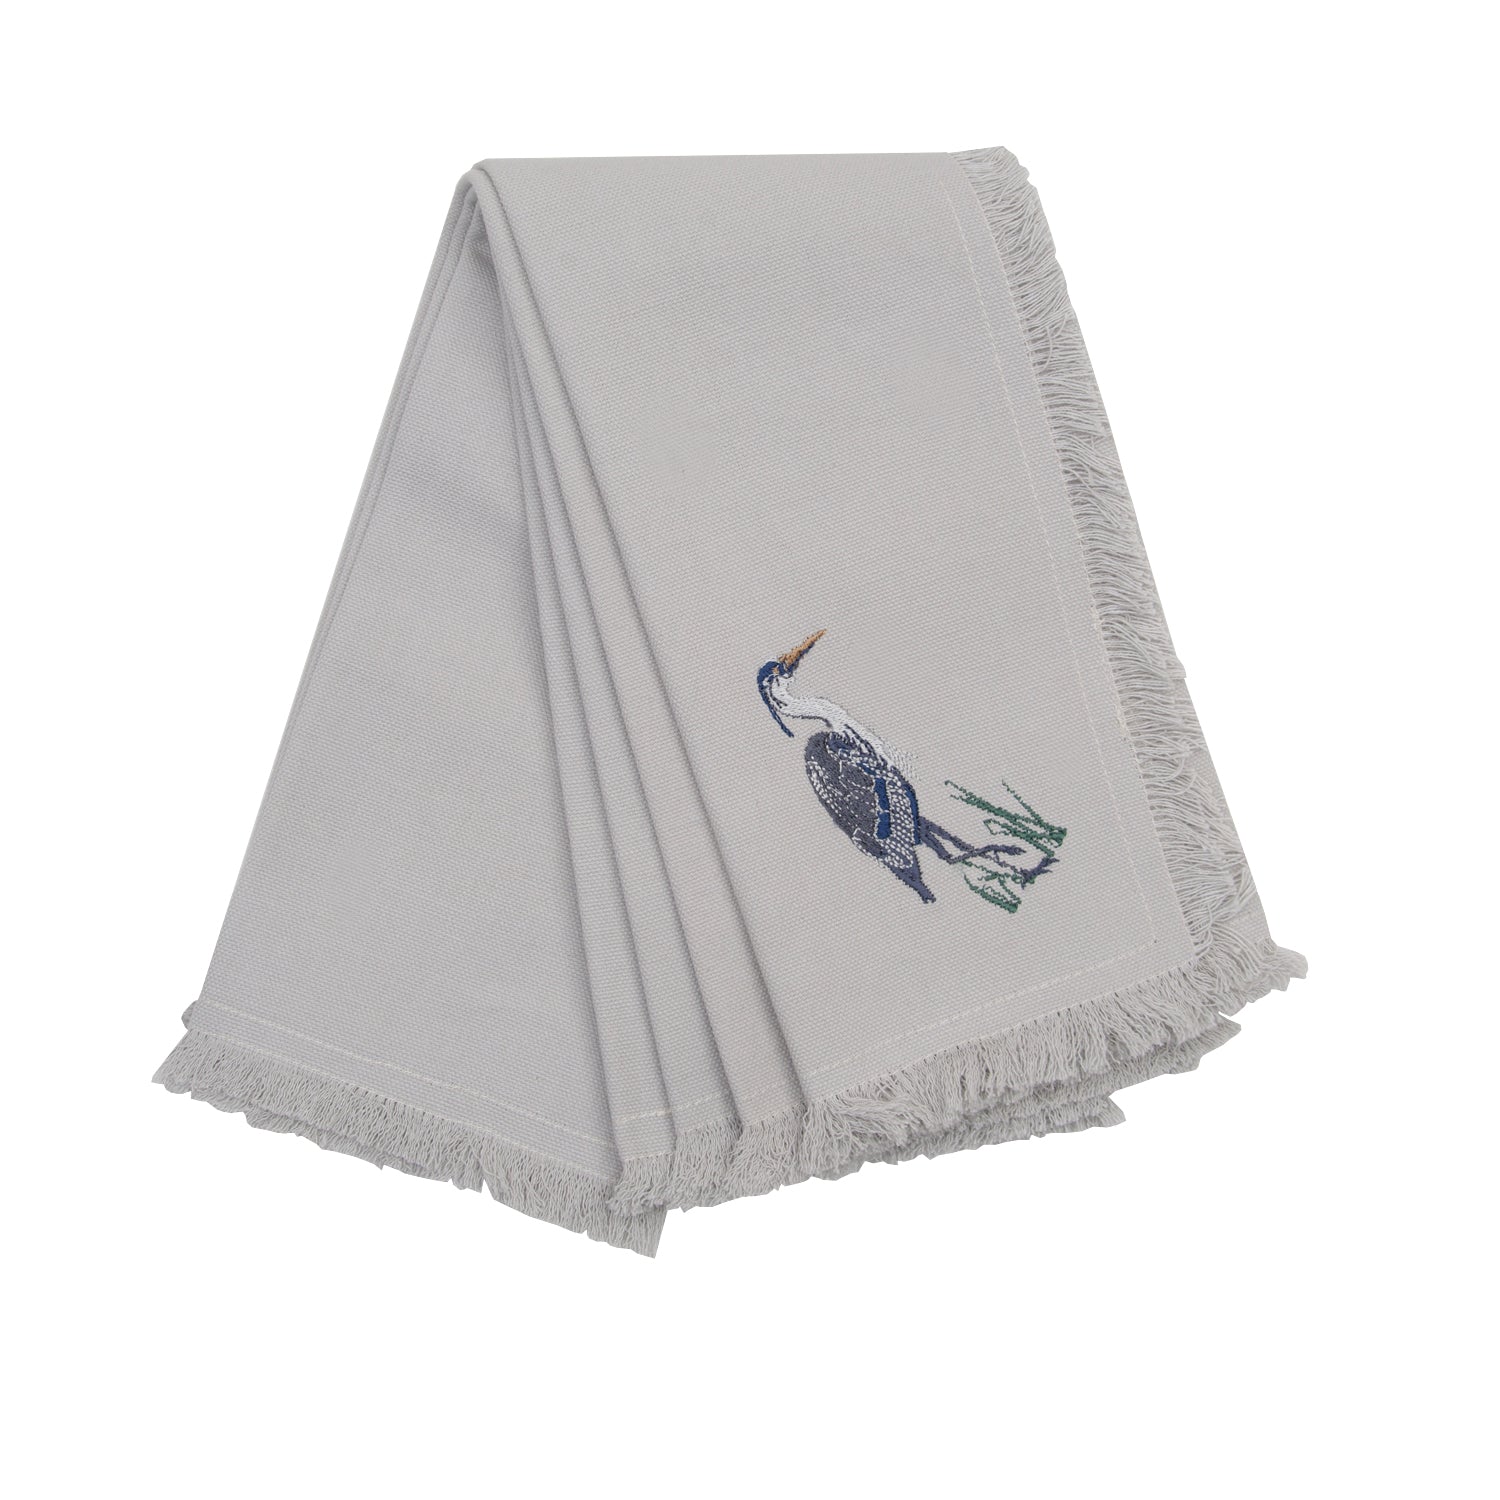 Grey cotton fringed napkin set of 4 featuring embroidery of Great Blue Heron.